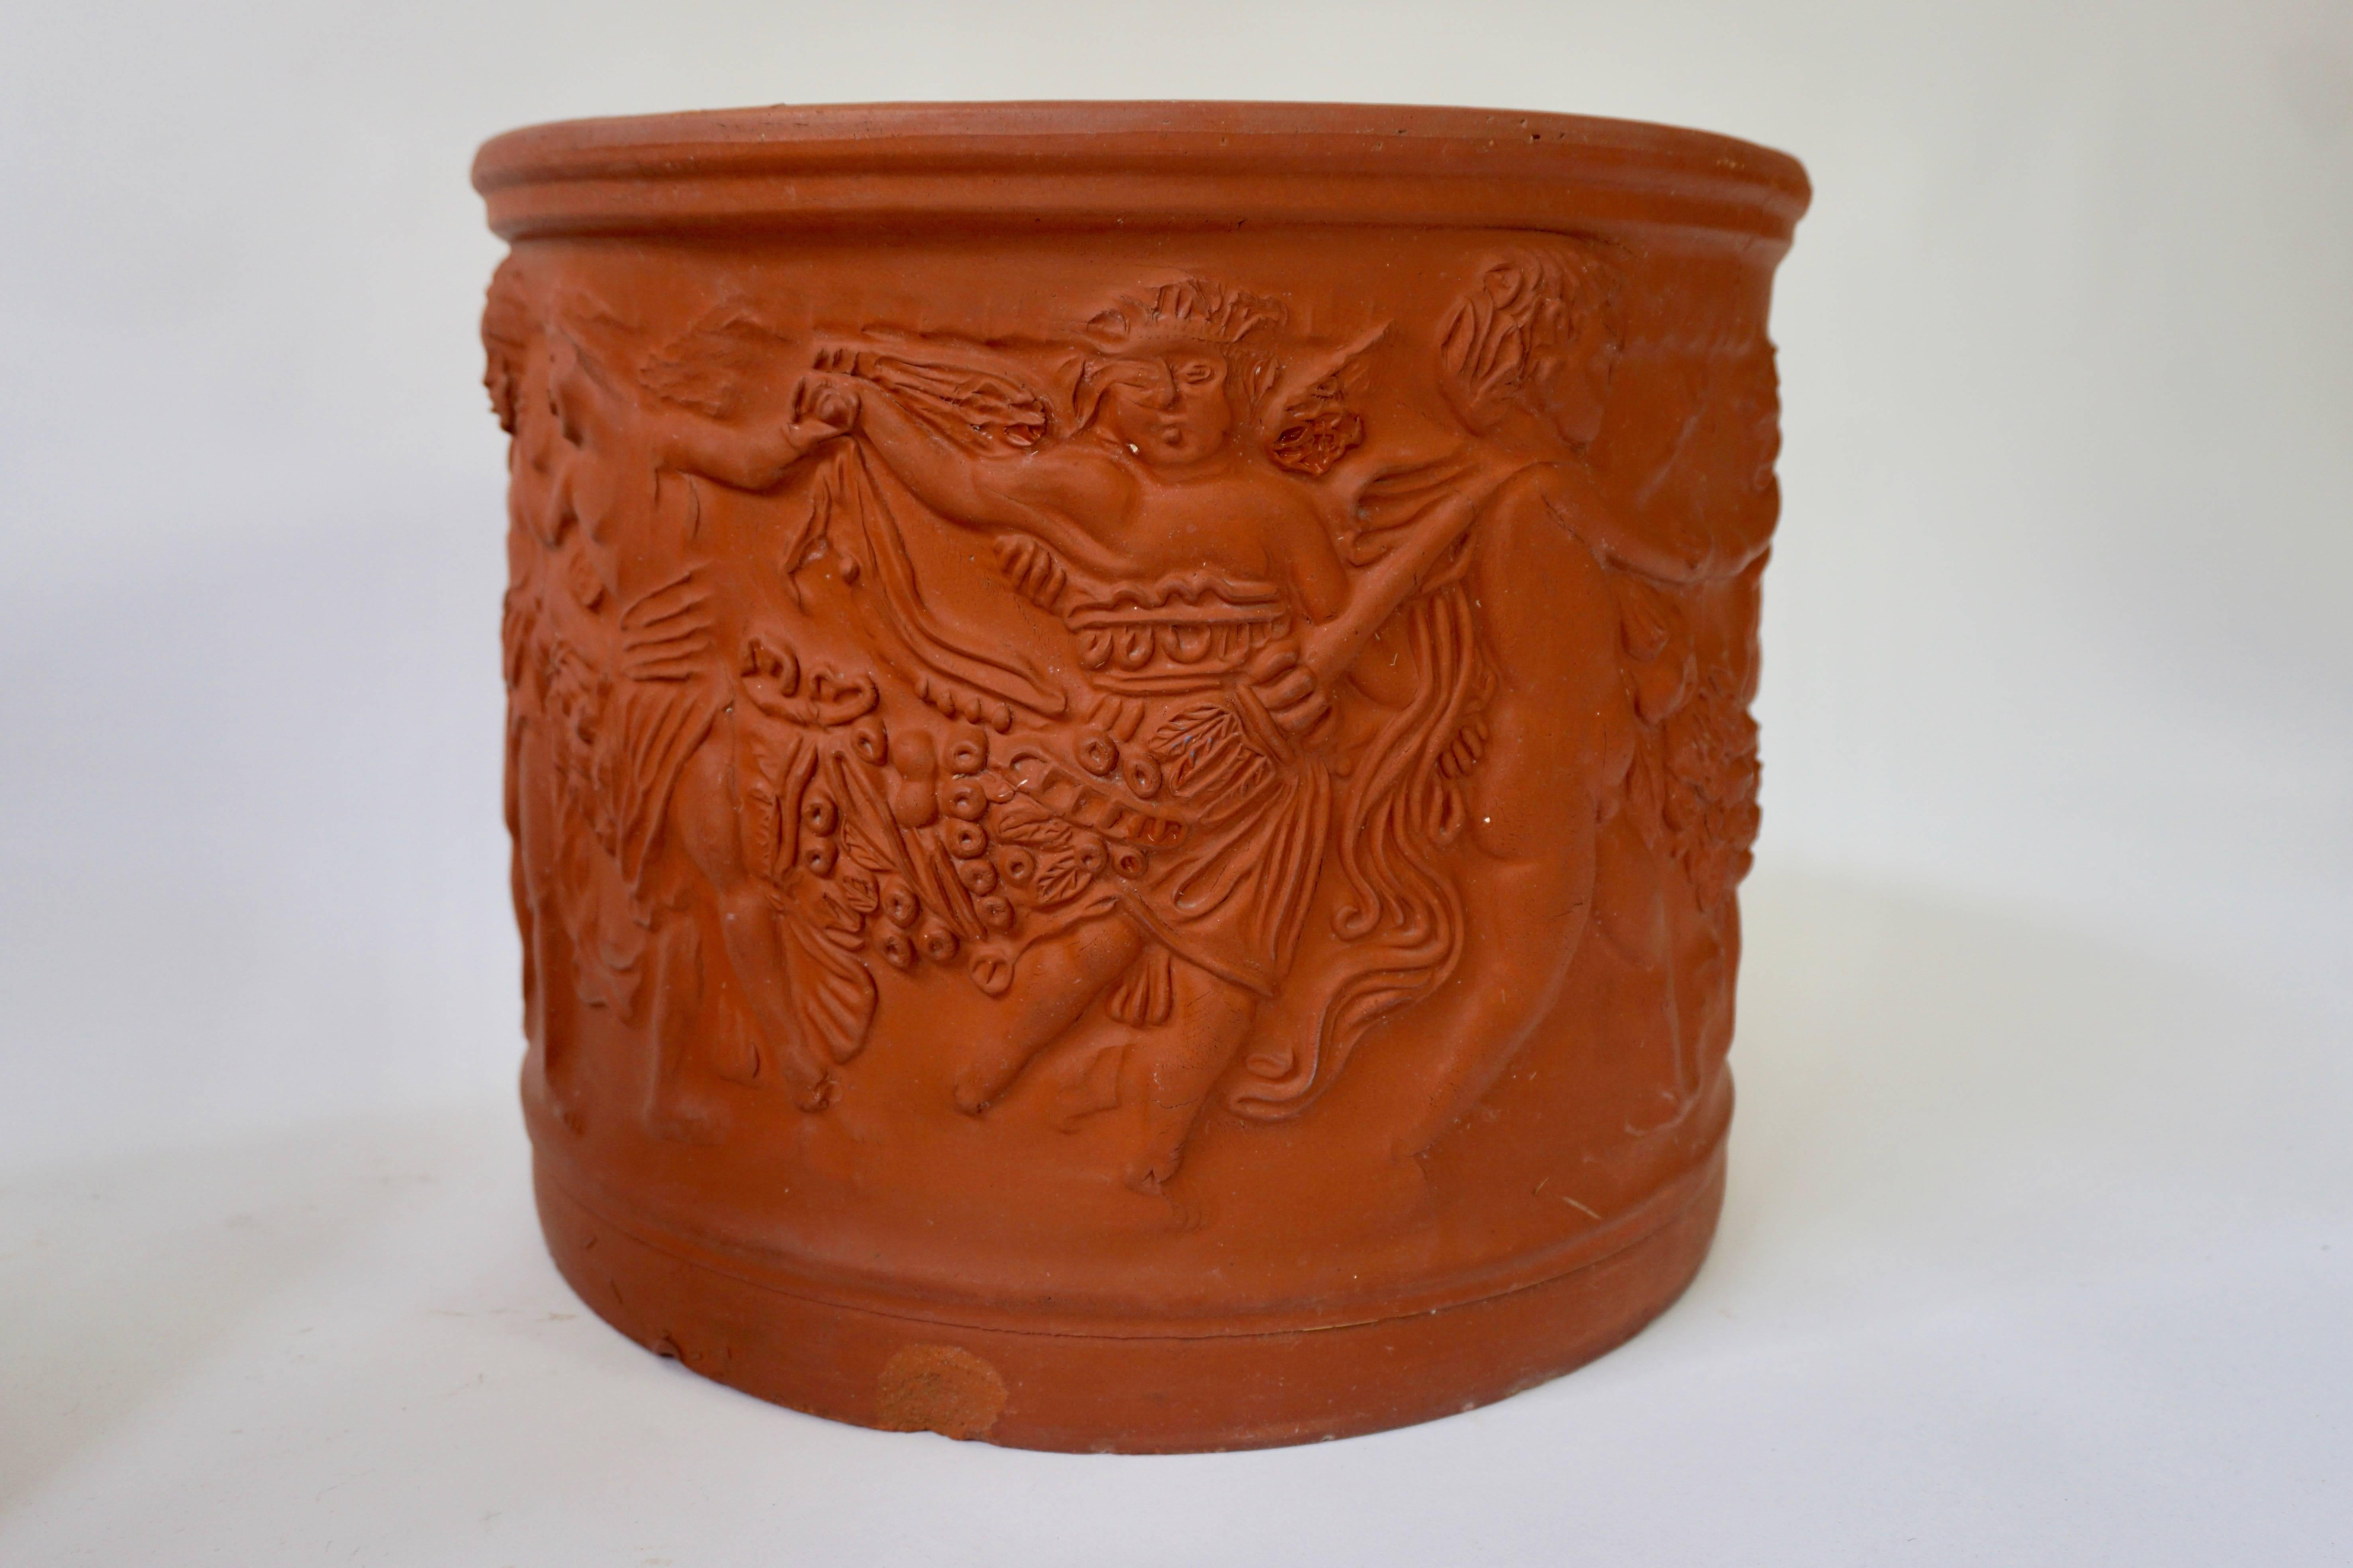 20th Century Terracotta Planter or Urn by Bitossi